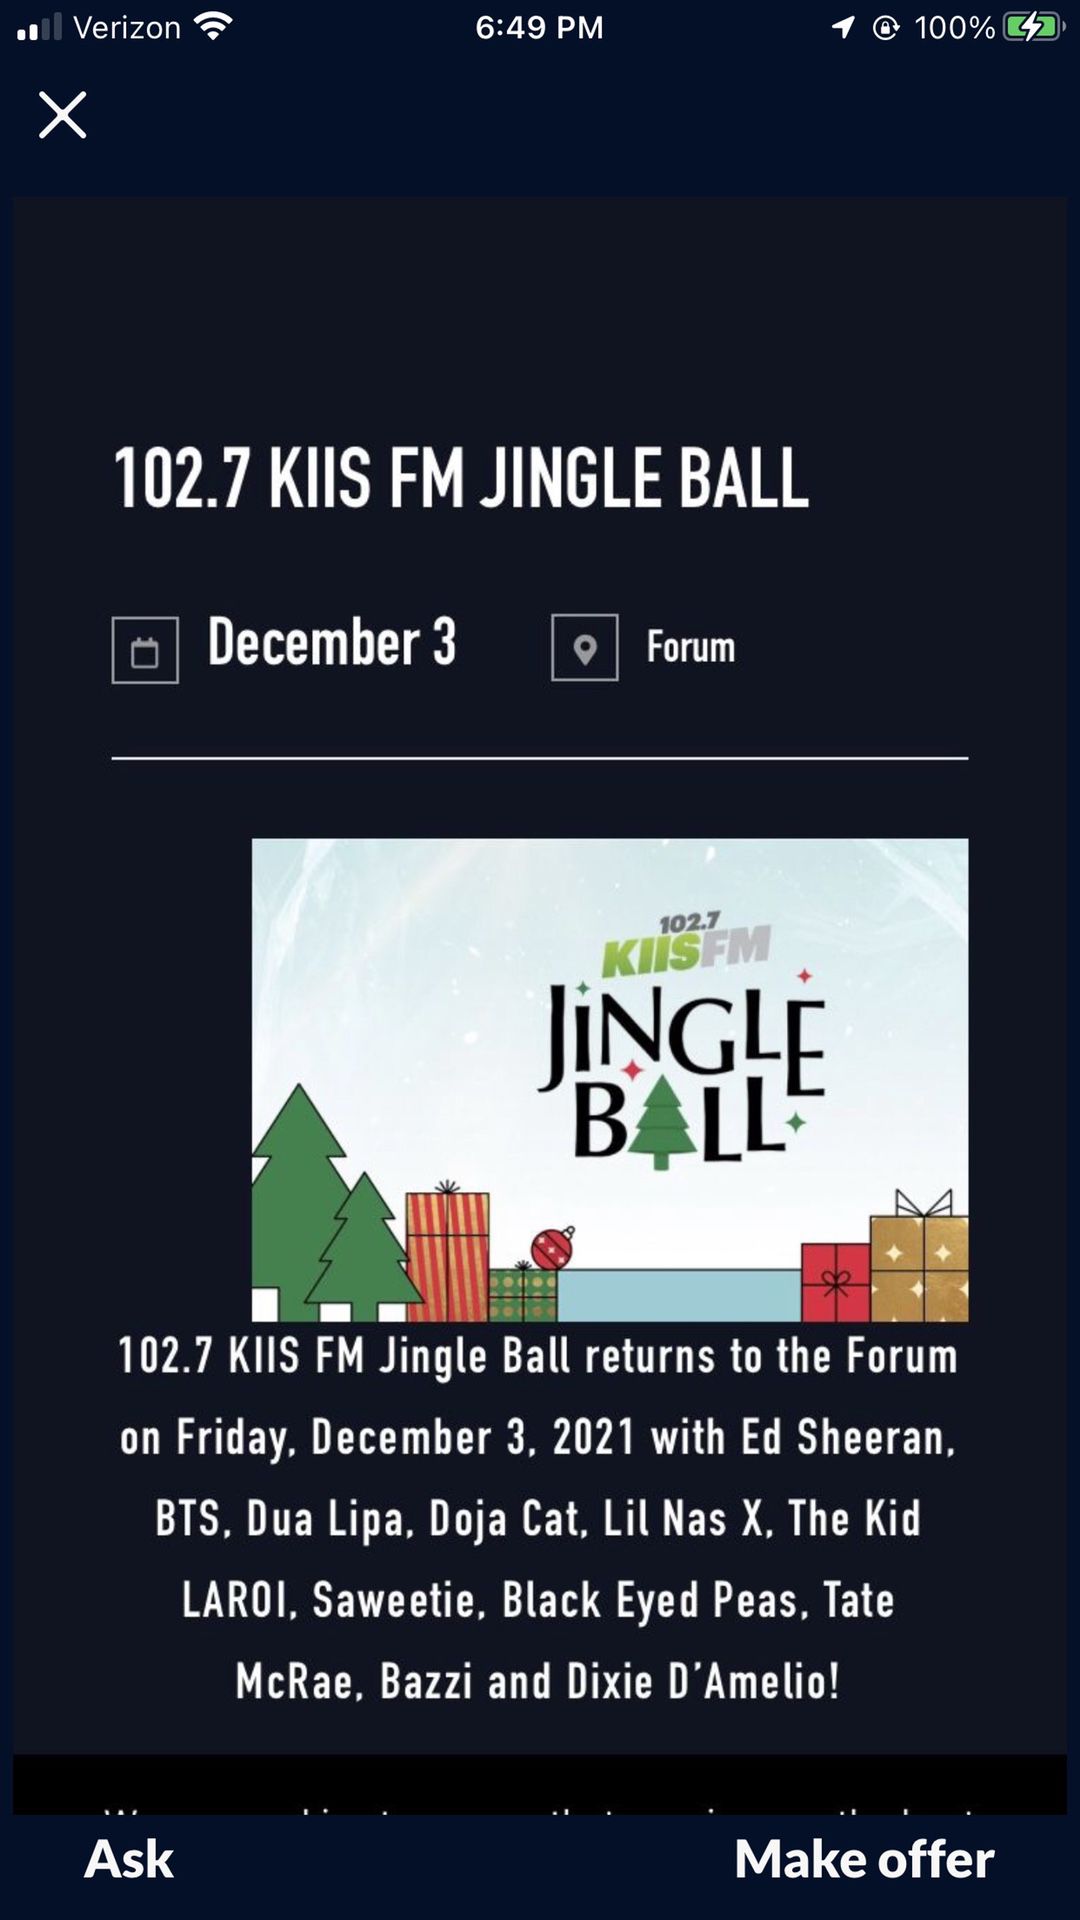 Jingle Ball 🎄🎁🎤🍺🍻🍹SOLD OUT SHOW 🔥🔥FRIDAY DECEMBER 3 (2) TICKETS 🎫 🎫 $160 EACH $320 FOR PAIR 🎫🎫